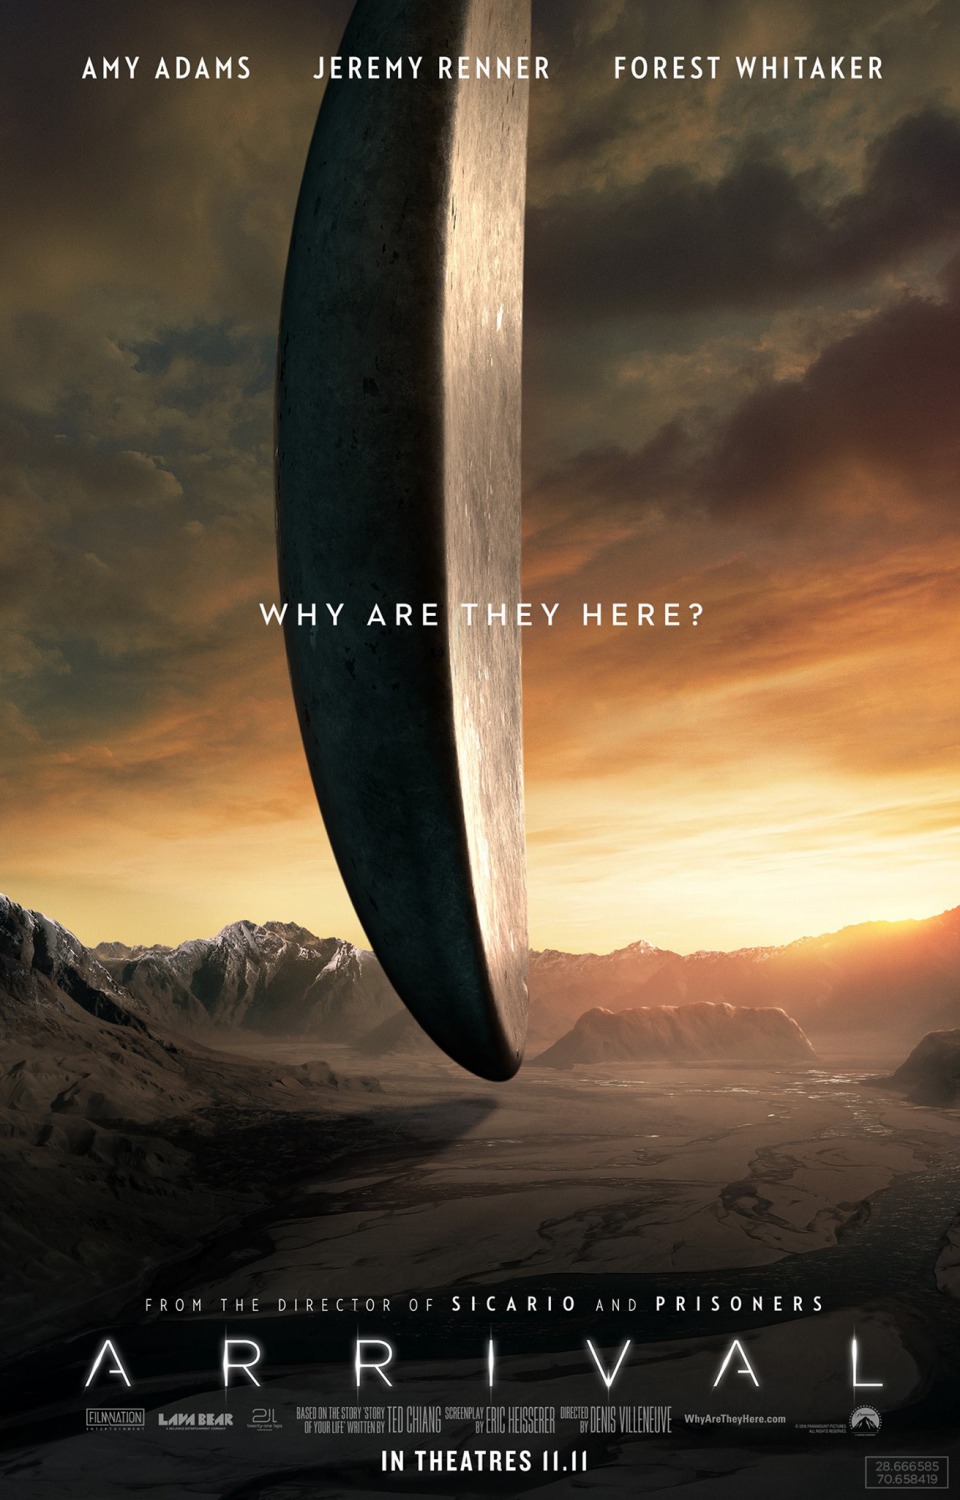 Trailer, Images and Posters for ARRIVAL Starring Amy Adams | The